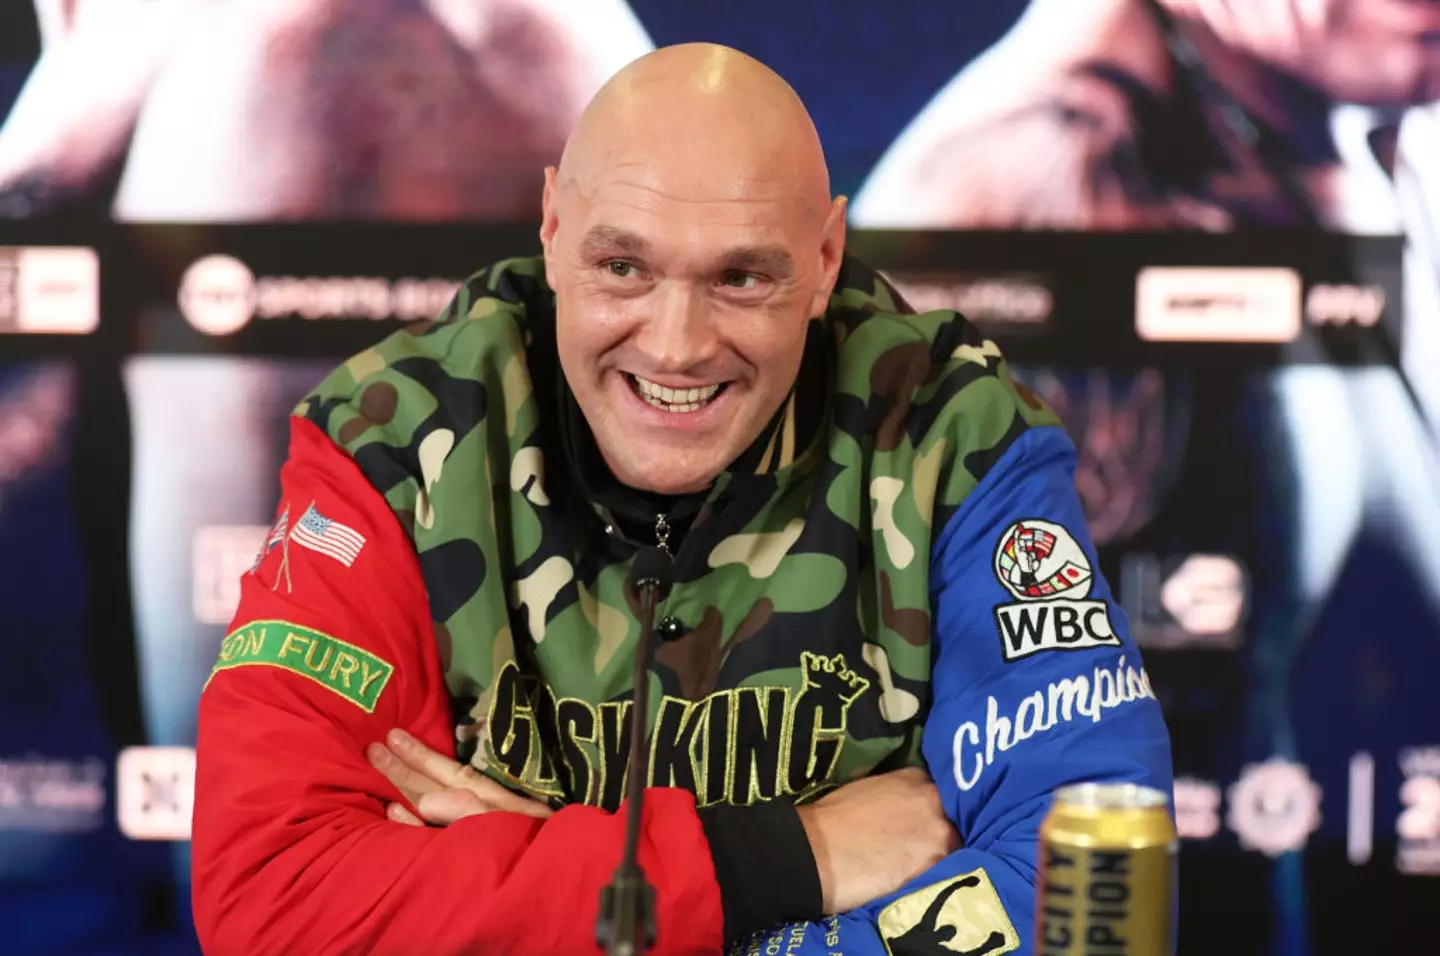 Tyson Fury is preparing to face Oleksandr Usyk (Image: Getty)